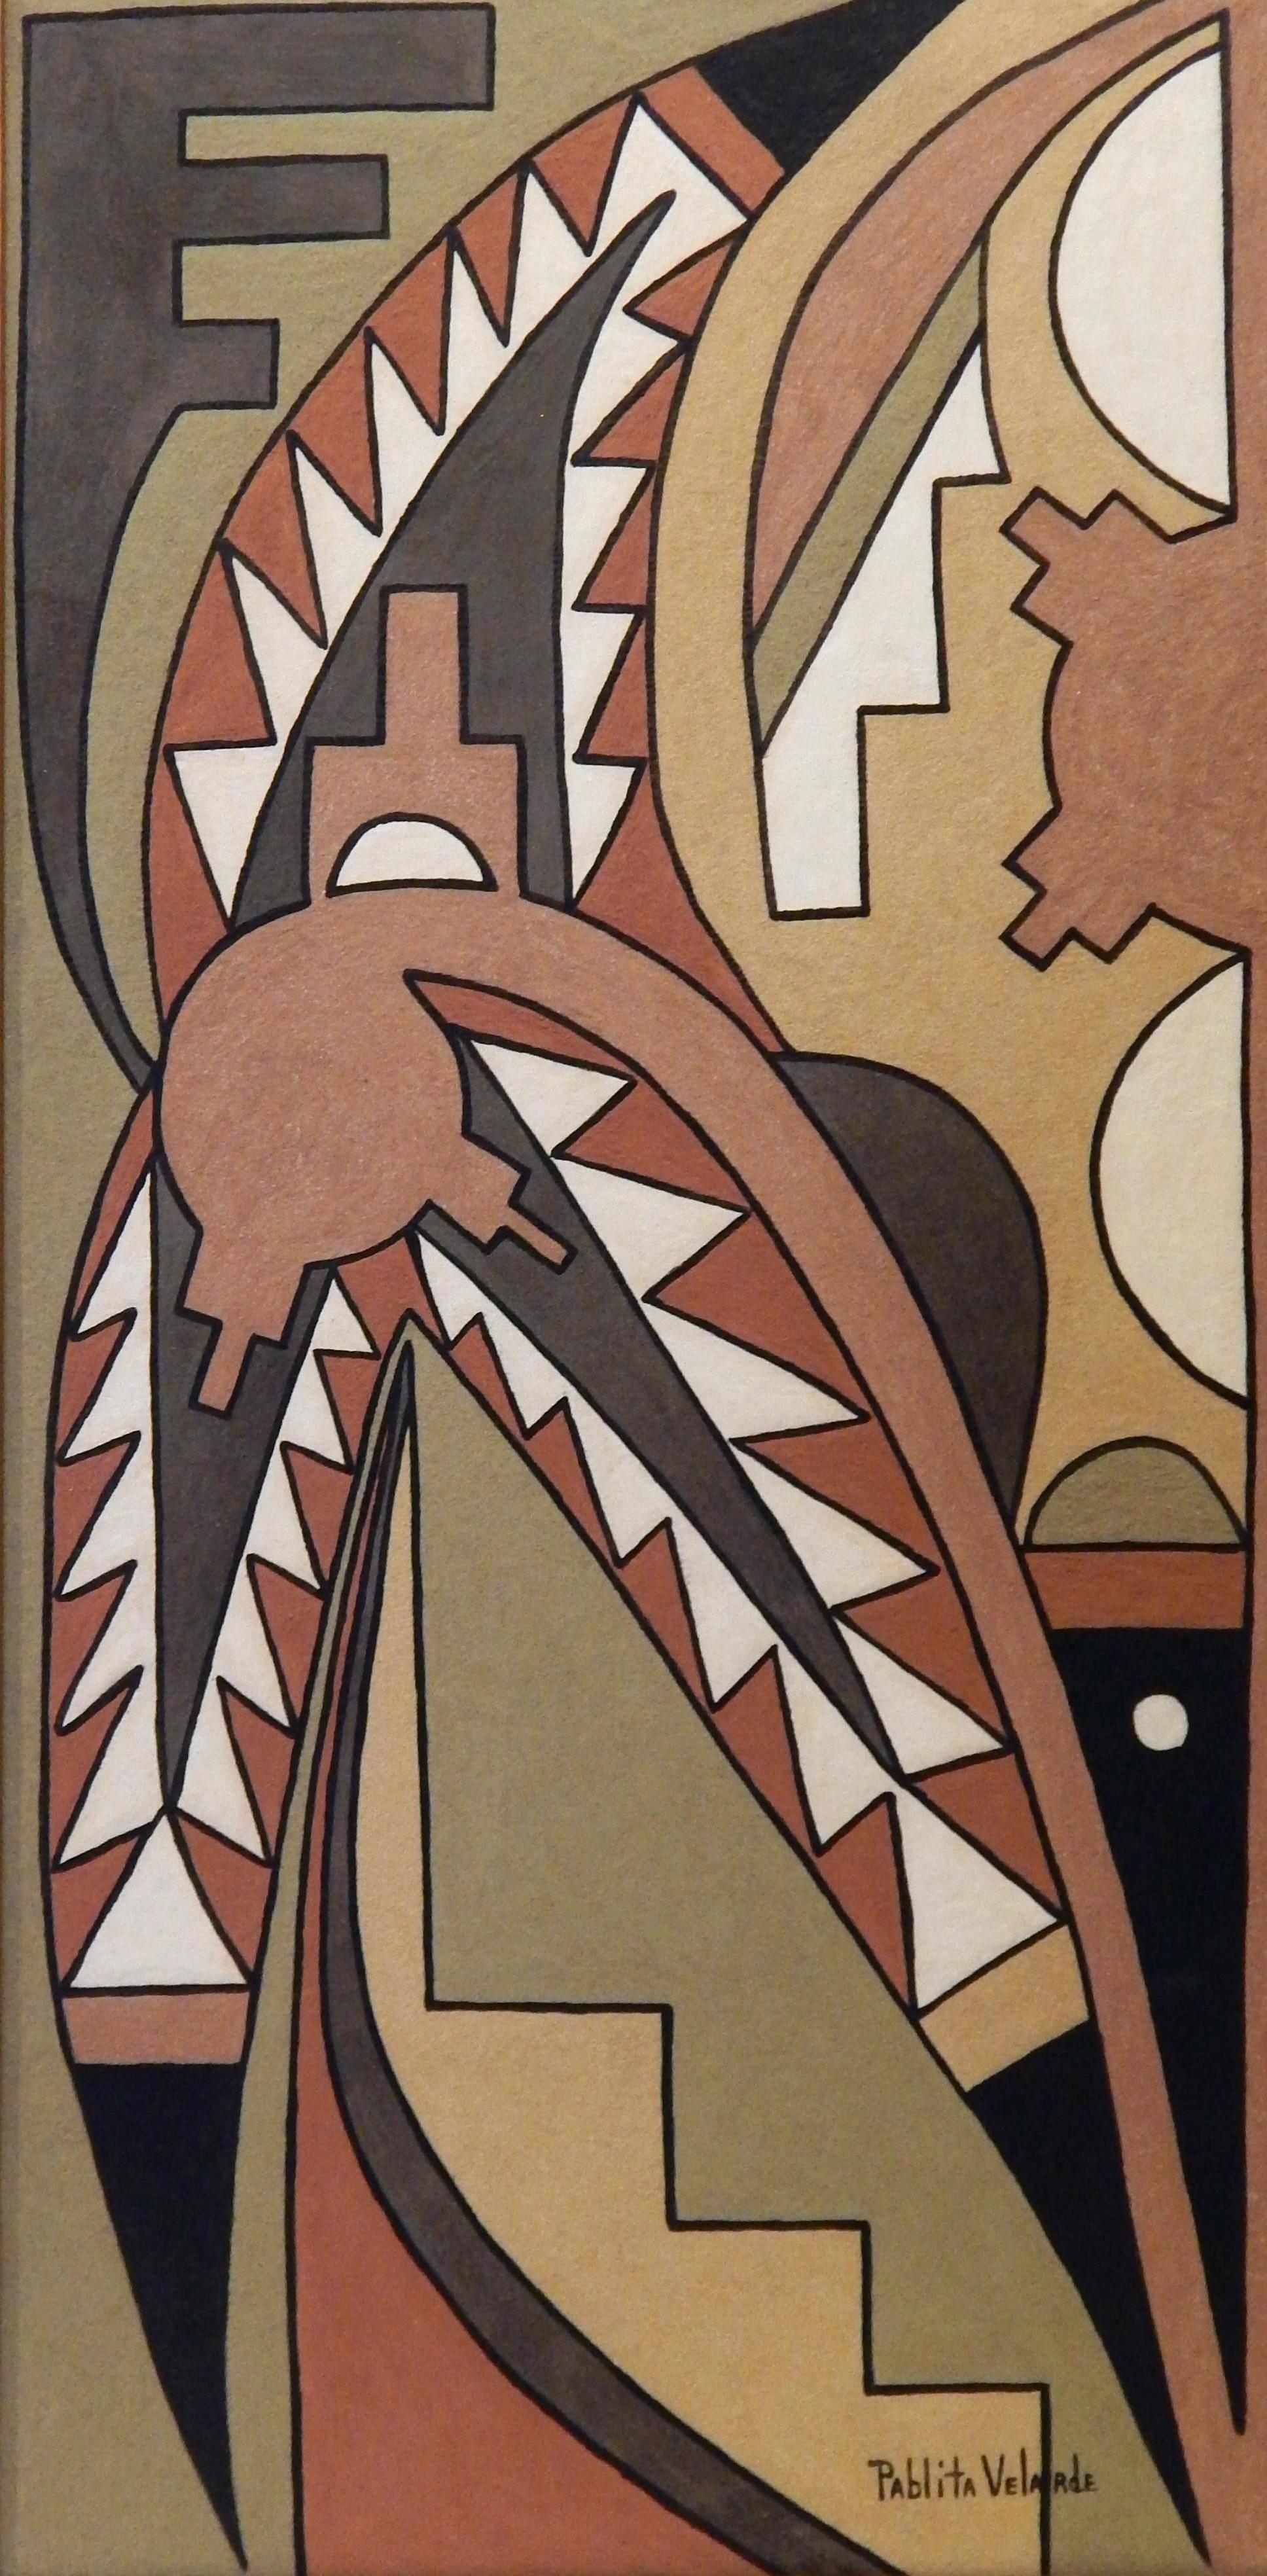 Abstract pigment painting by Pablita Valarde (1918-2006) with Native American Deco motif
In excellent condition, signed lower right.
Measures: 24